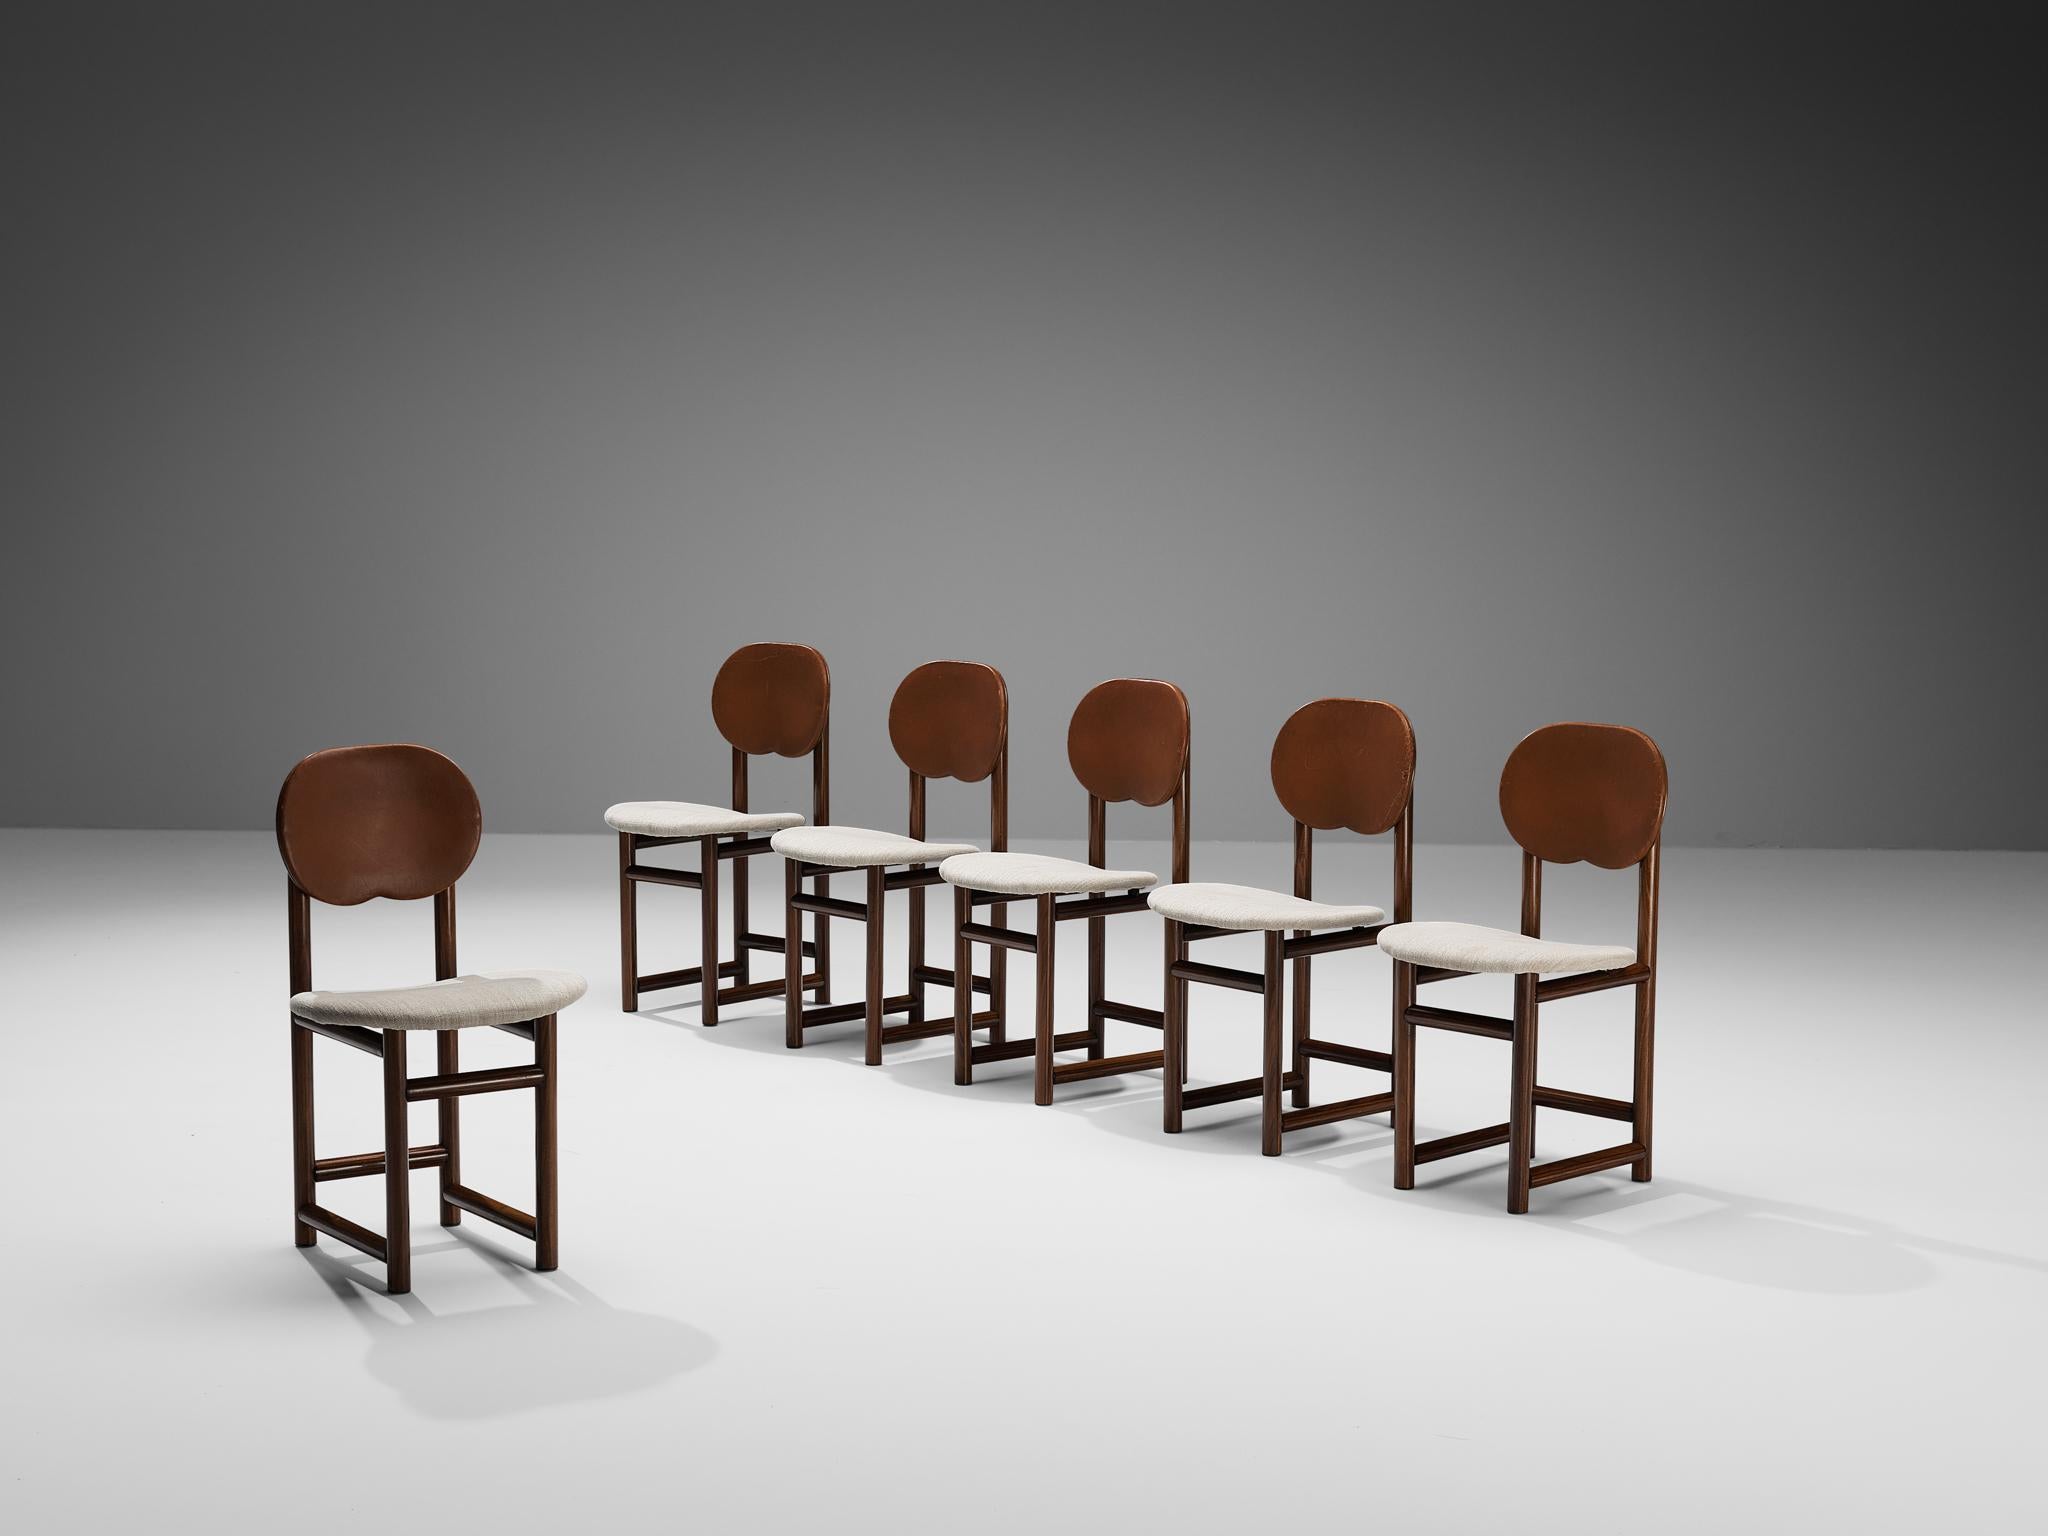 Afra & Tobia Scarpa for Maxalto, 'New Harmony' set of six dining chairs, walnut, fabric, leather, Italy, circa 1983

The 'New Harmony' collection designed by Afra & Tobia Scarpa is distinguished by its sleek proportions and postmodern aesthetic.